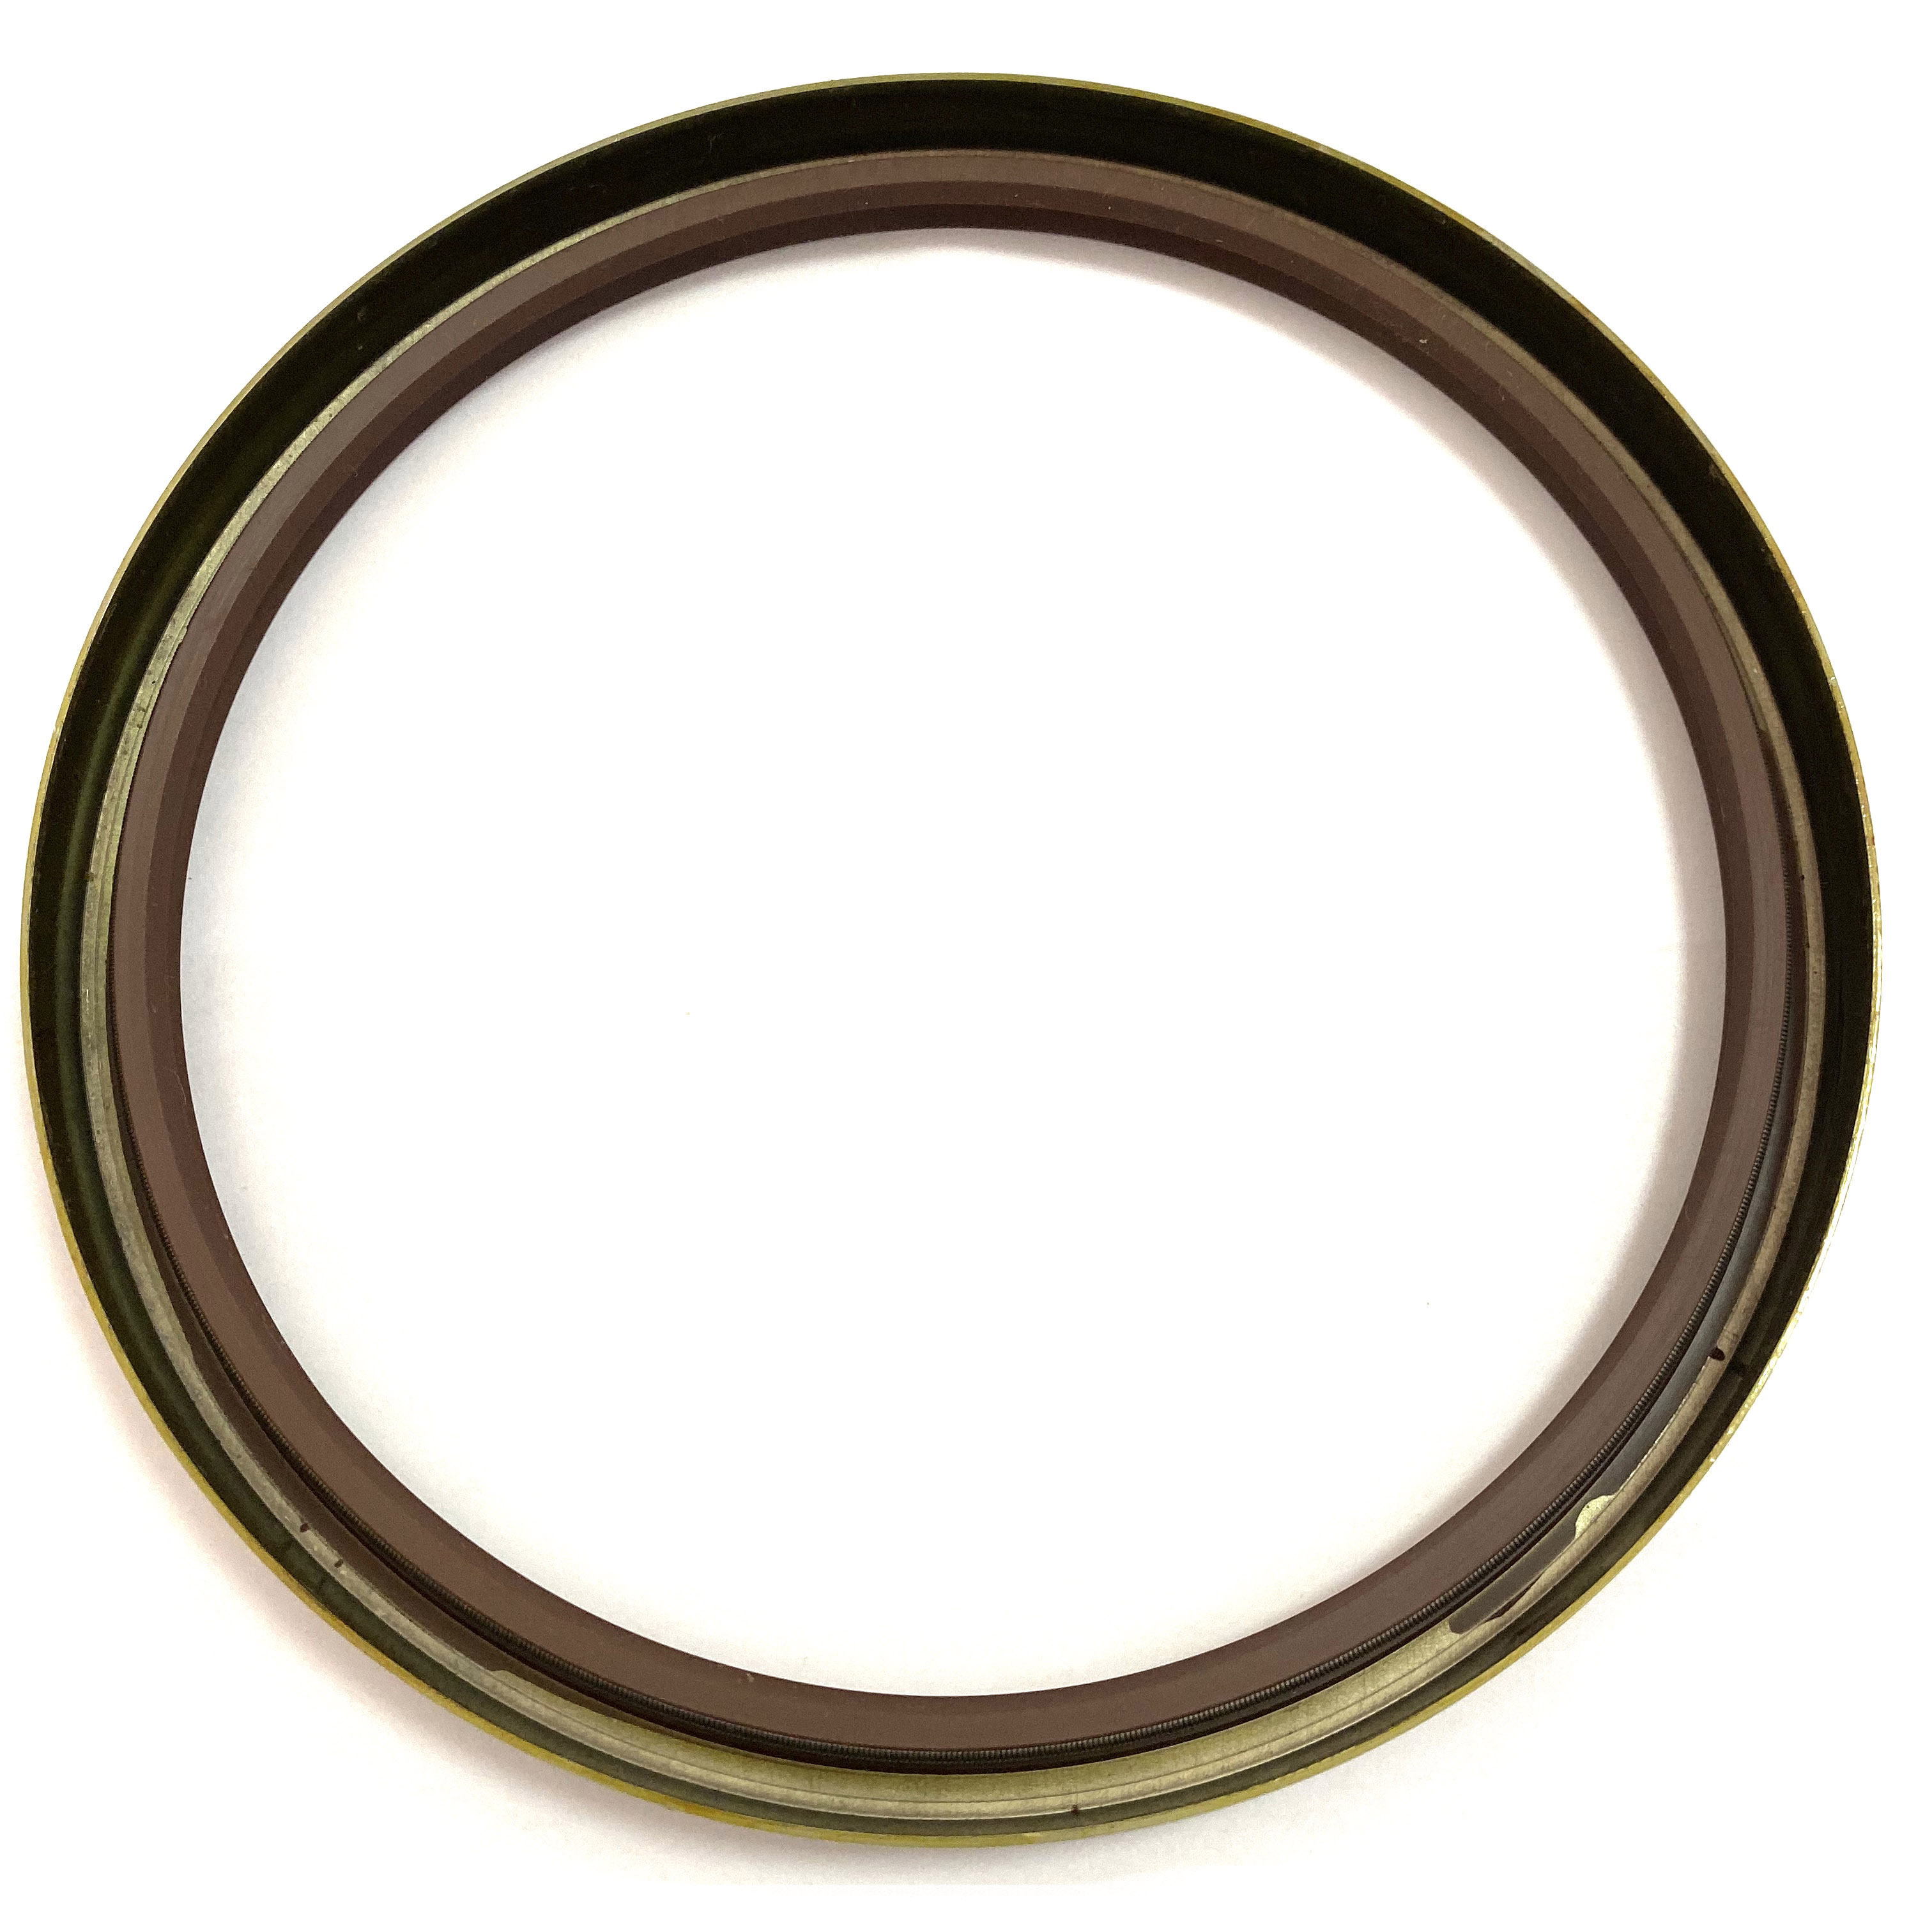 XTSEAO OEM 43090-90060 brand 982801193 TB2 oil seal Size 154*175*14 for truck